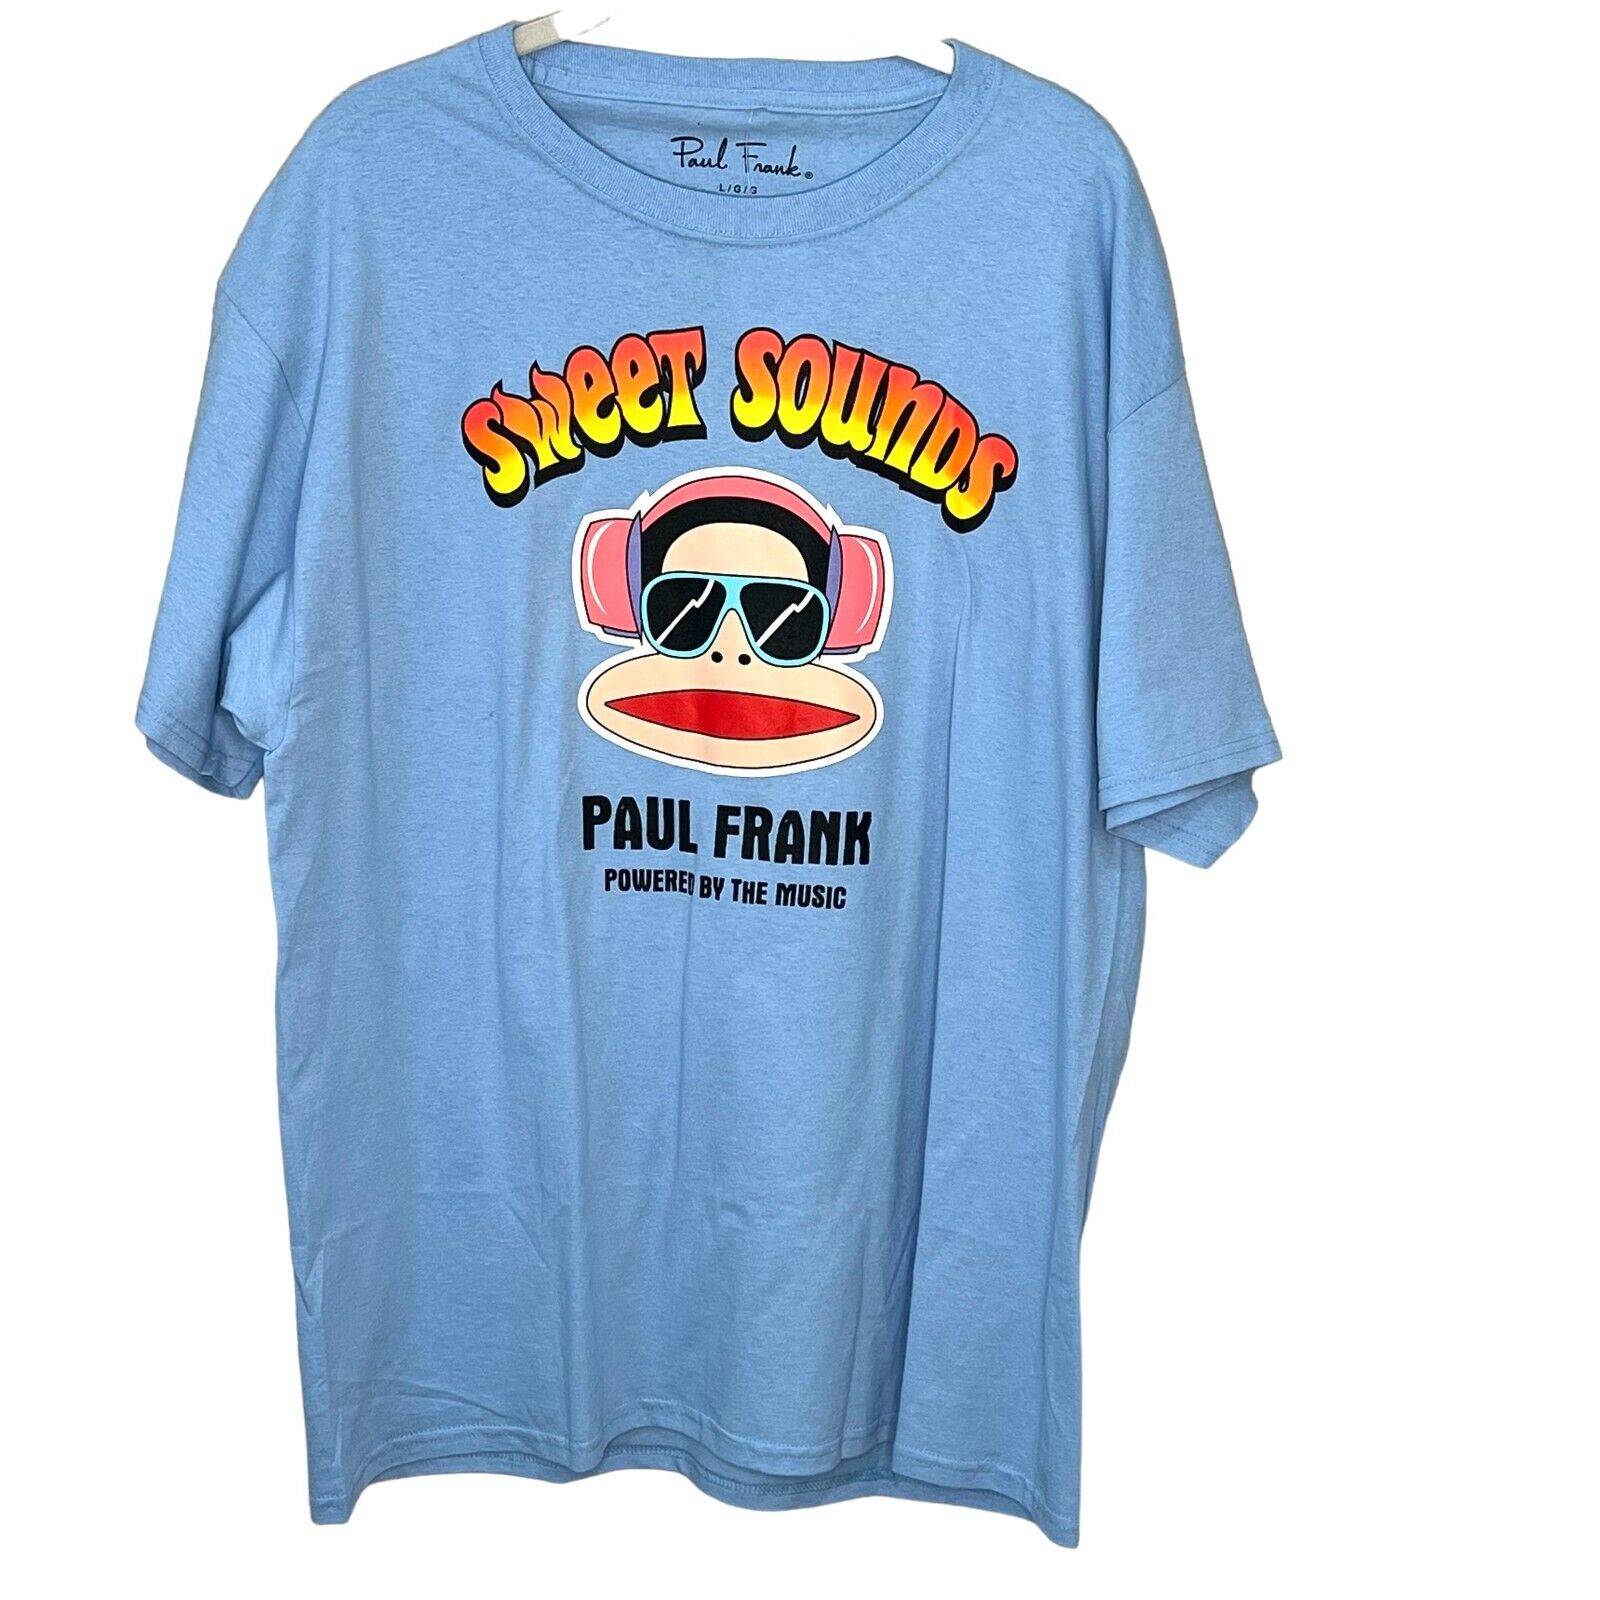 Paul Frank Mens Blue Sweet Sounds Cotton Tee Size Large NEW